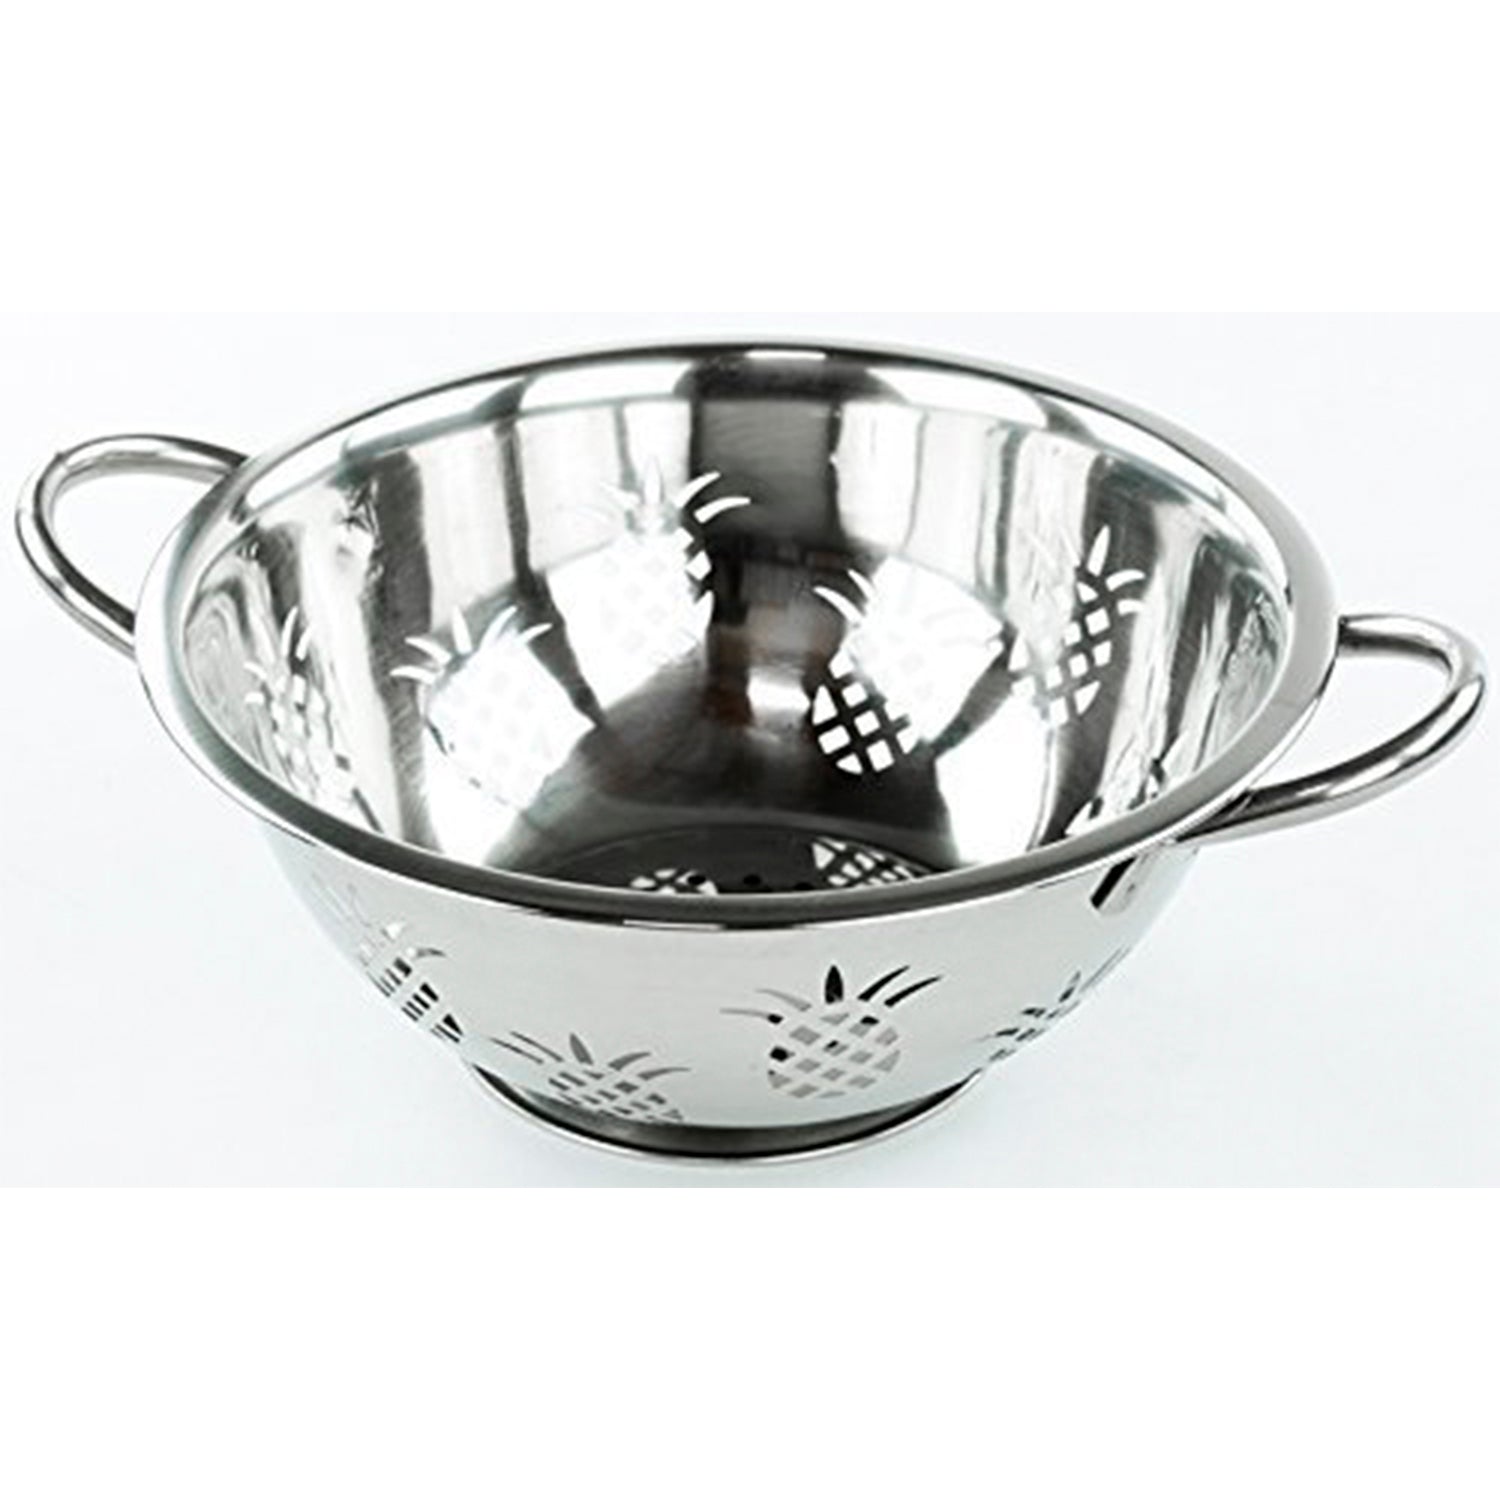 Durable Stainless Steel Pineapple Colander or Strainer